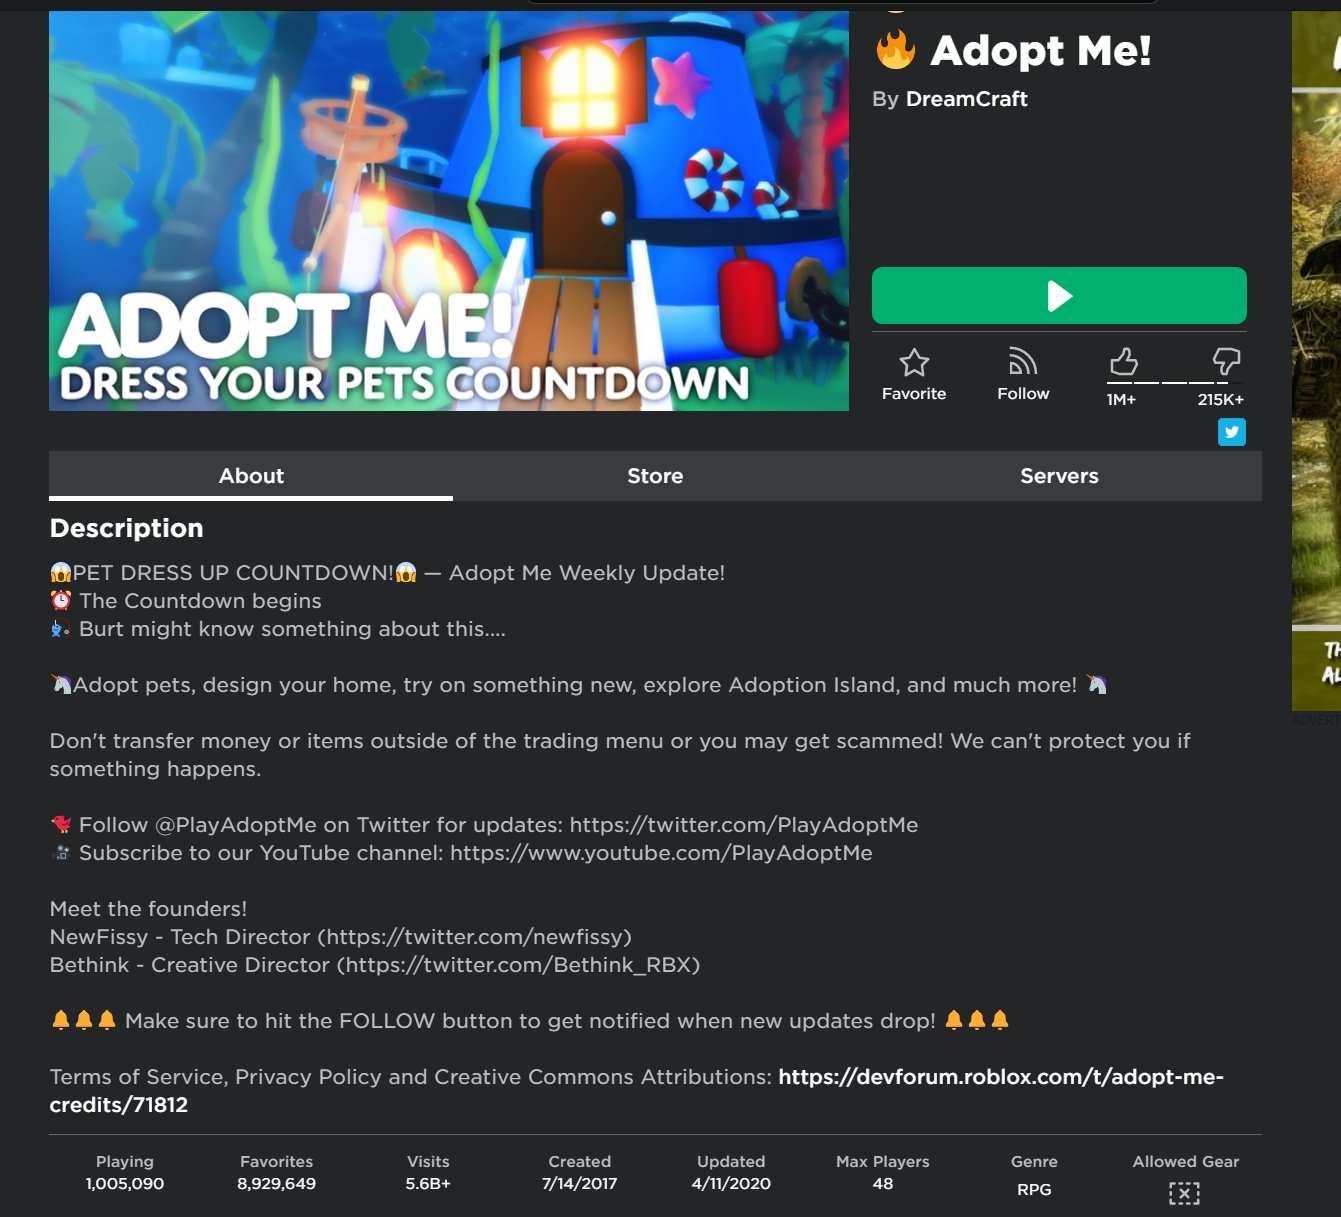 Fave On Twitter There Are One Million People Playing Adopt Me On Roblox Right Now When I Joined Roblox In 2007 There Was Less Than 21 000 Users Registered On The Entire Website - fave robloxfave twitter